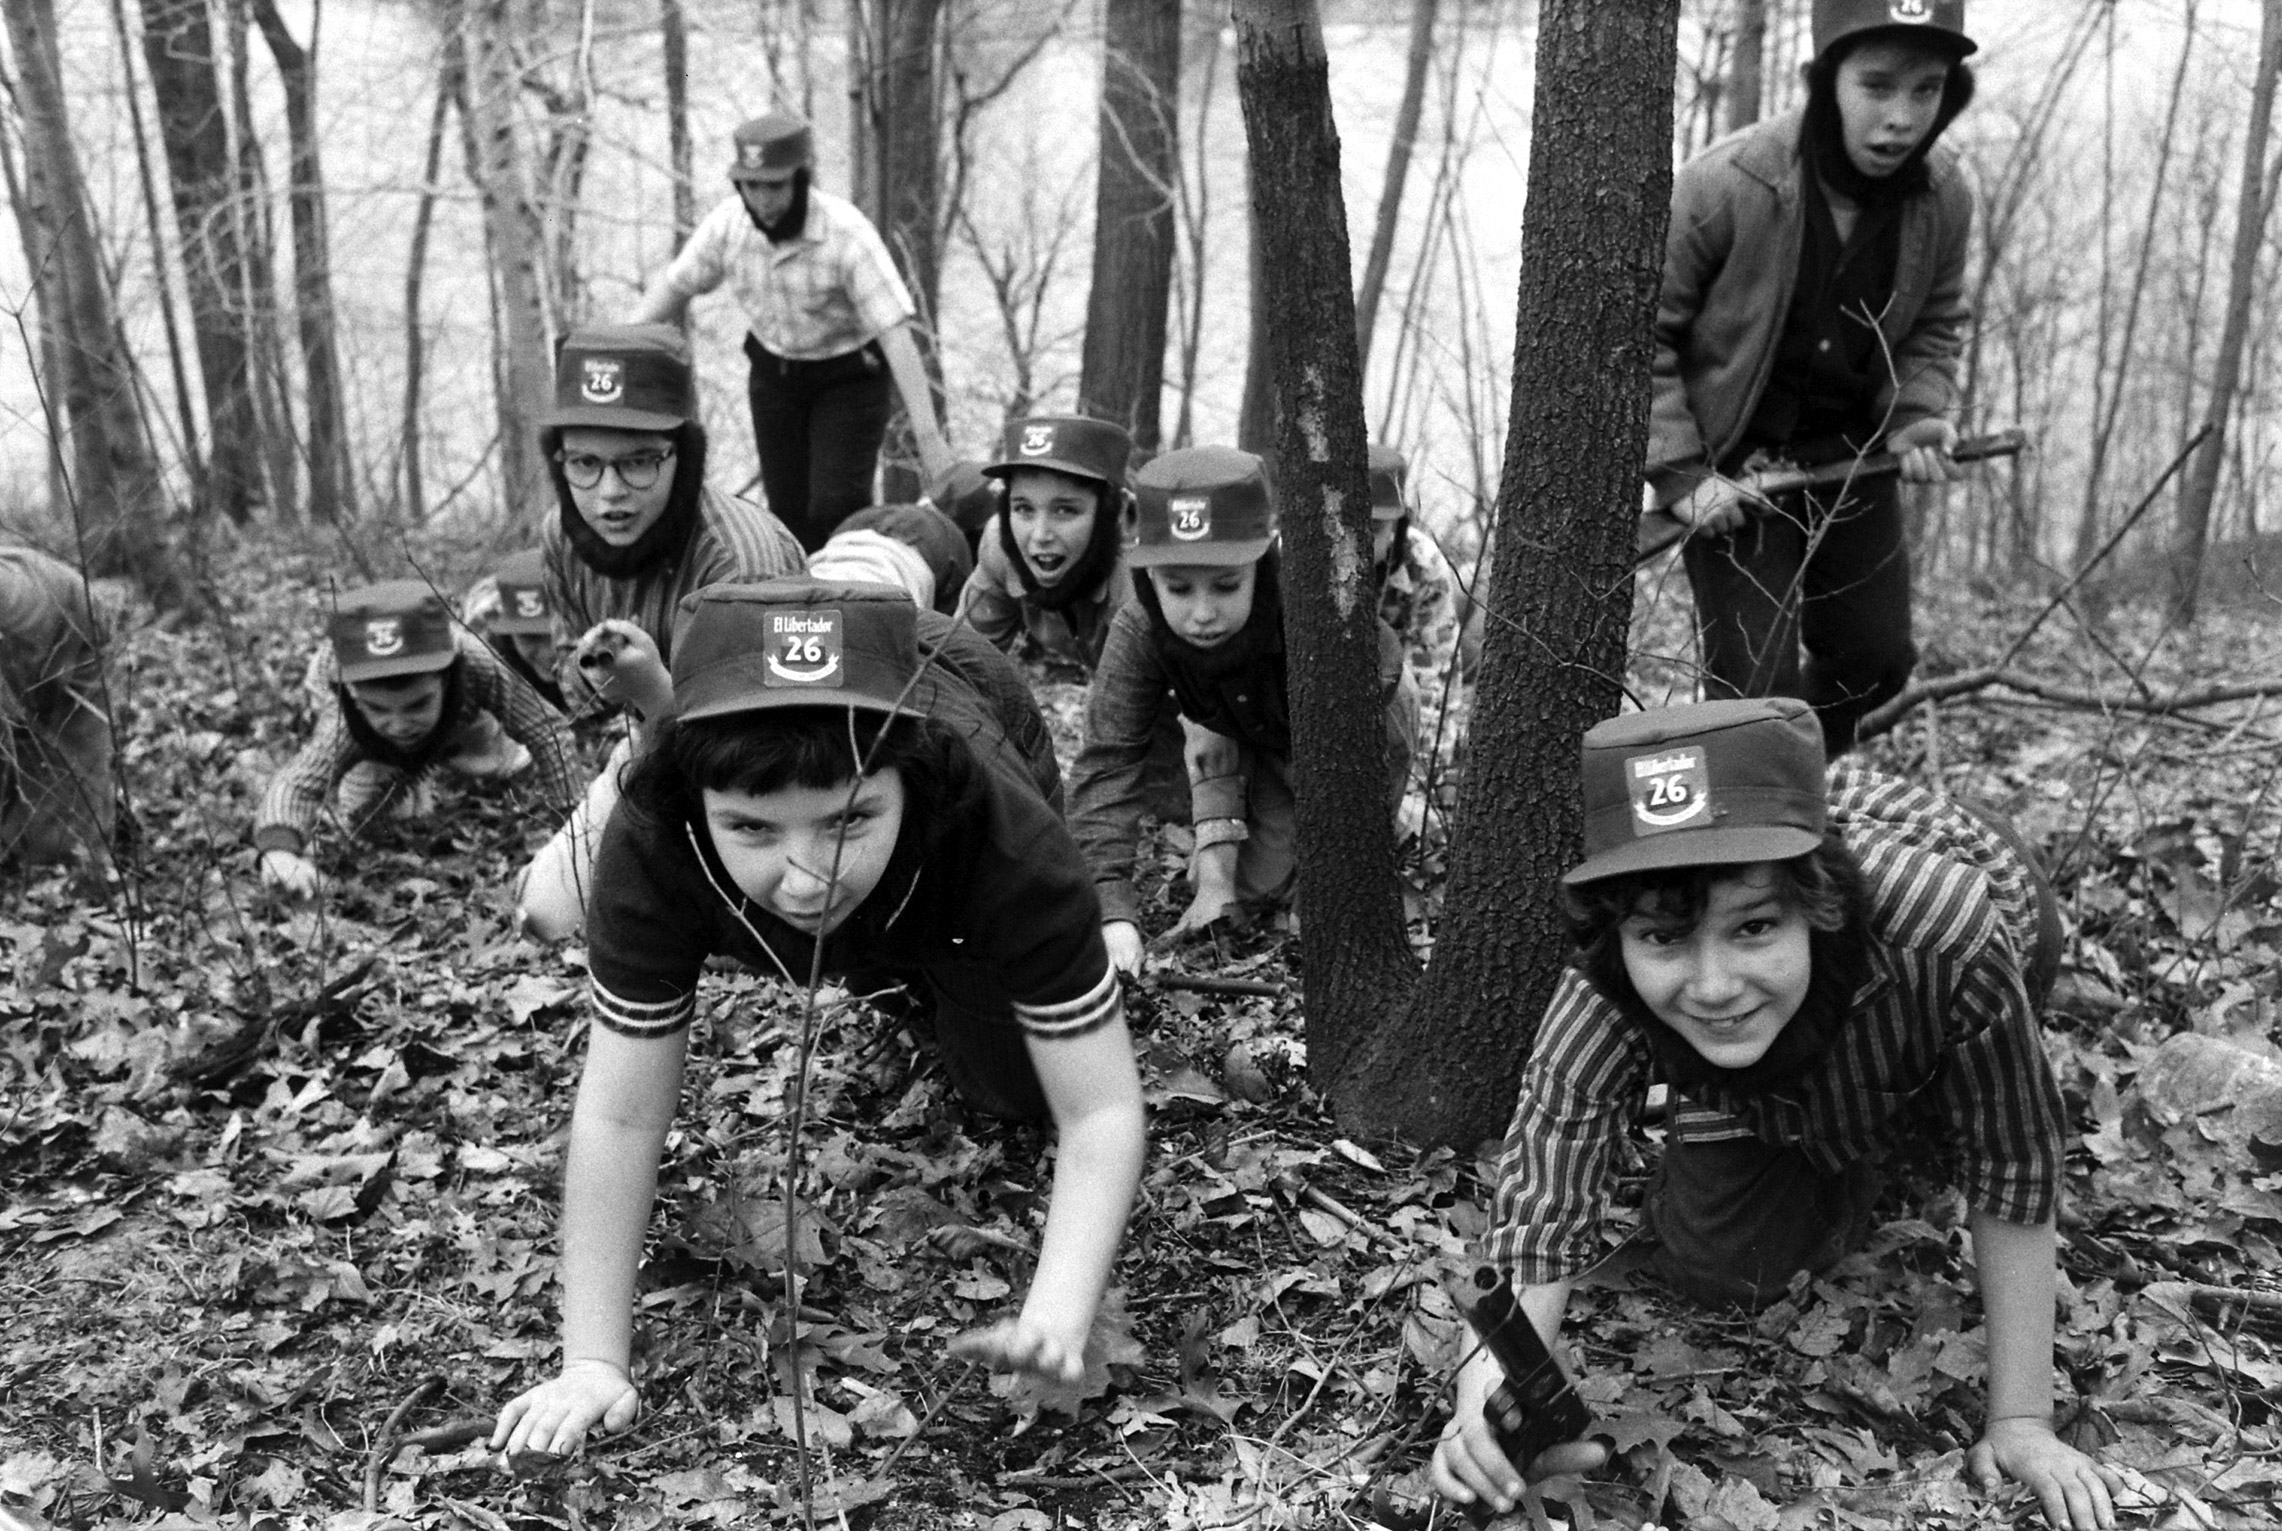 Children wearing Fidel Castro beards and hats, playing in the woods in 1959.